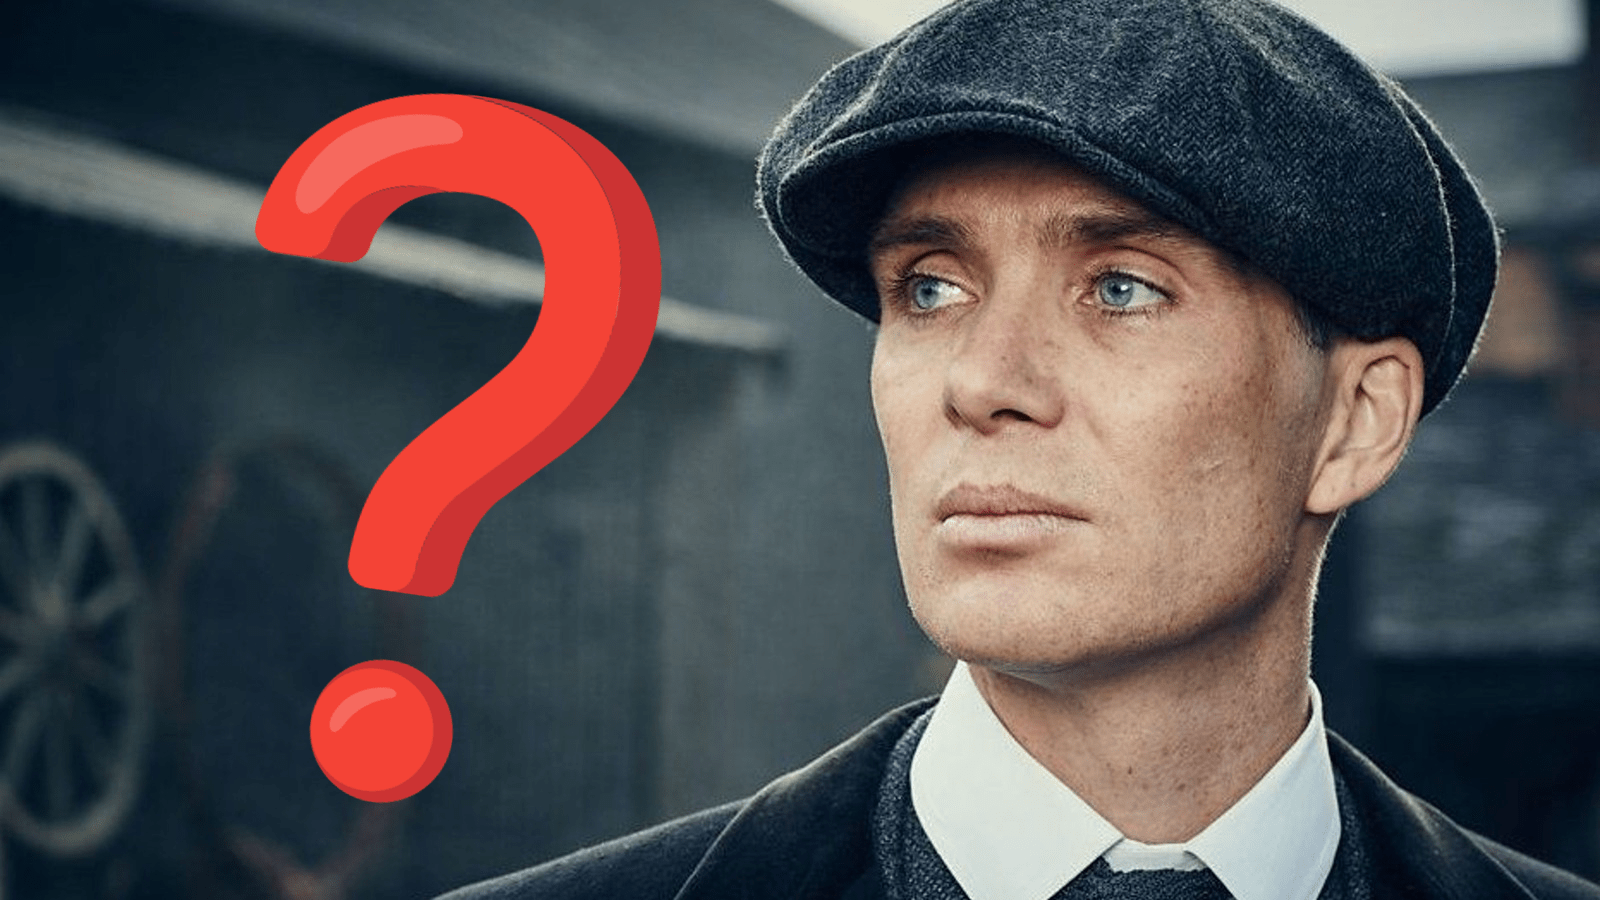 "Peaky Blinders" : Thomas Shelby a-t-il existé ?